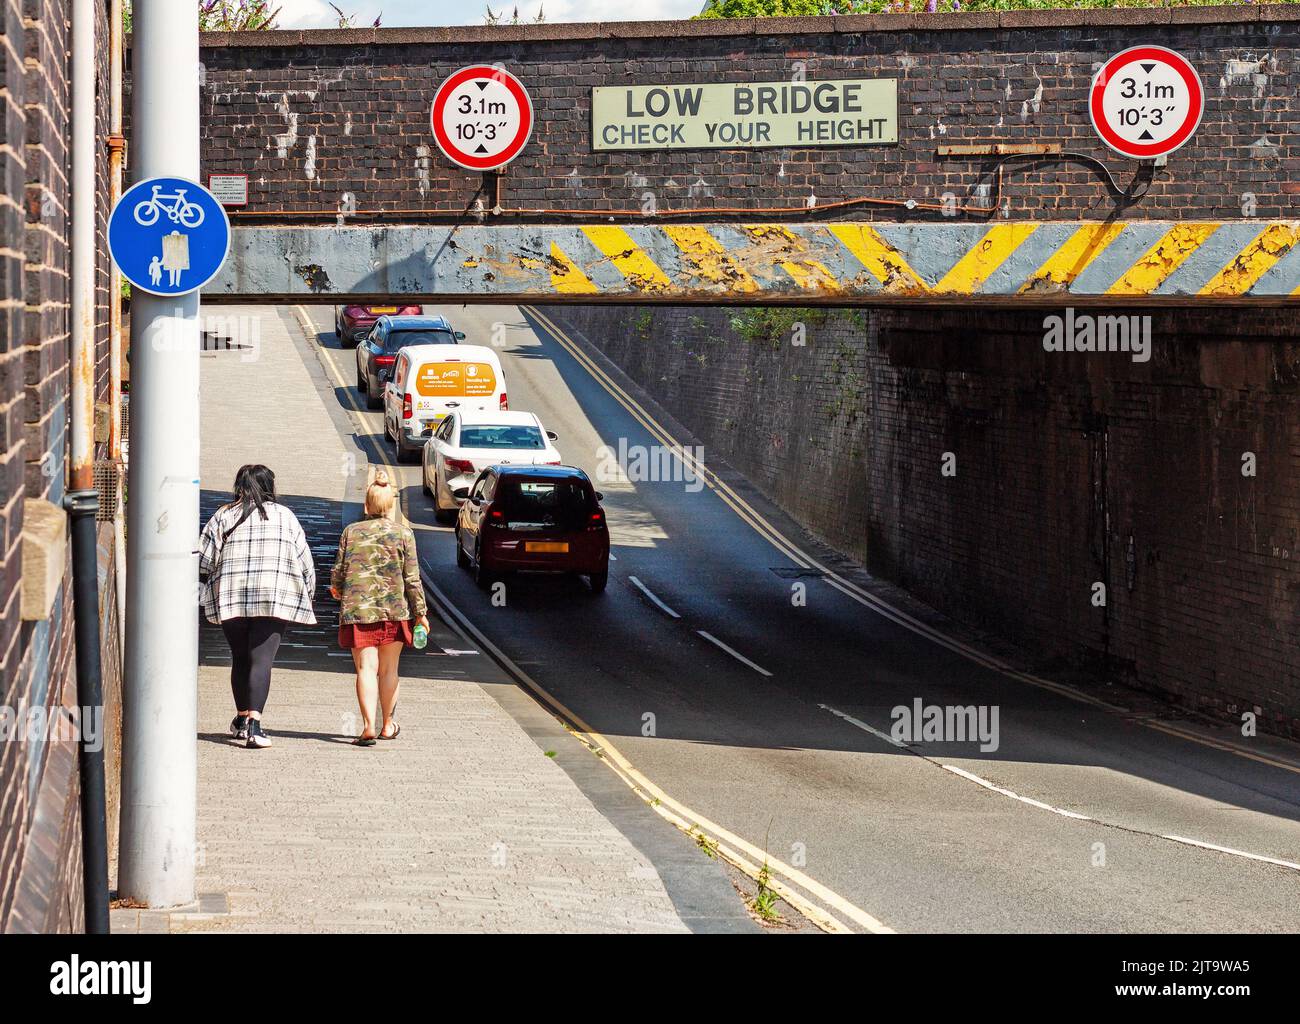 People walking and cars passing under a signed low bridge. An urban scene Stoke-on-Trent, UK Stock Photo